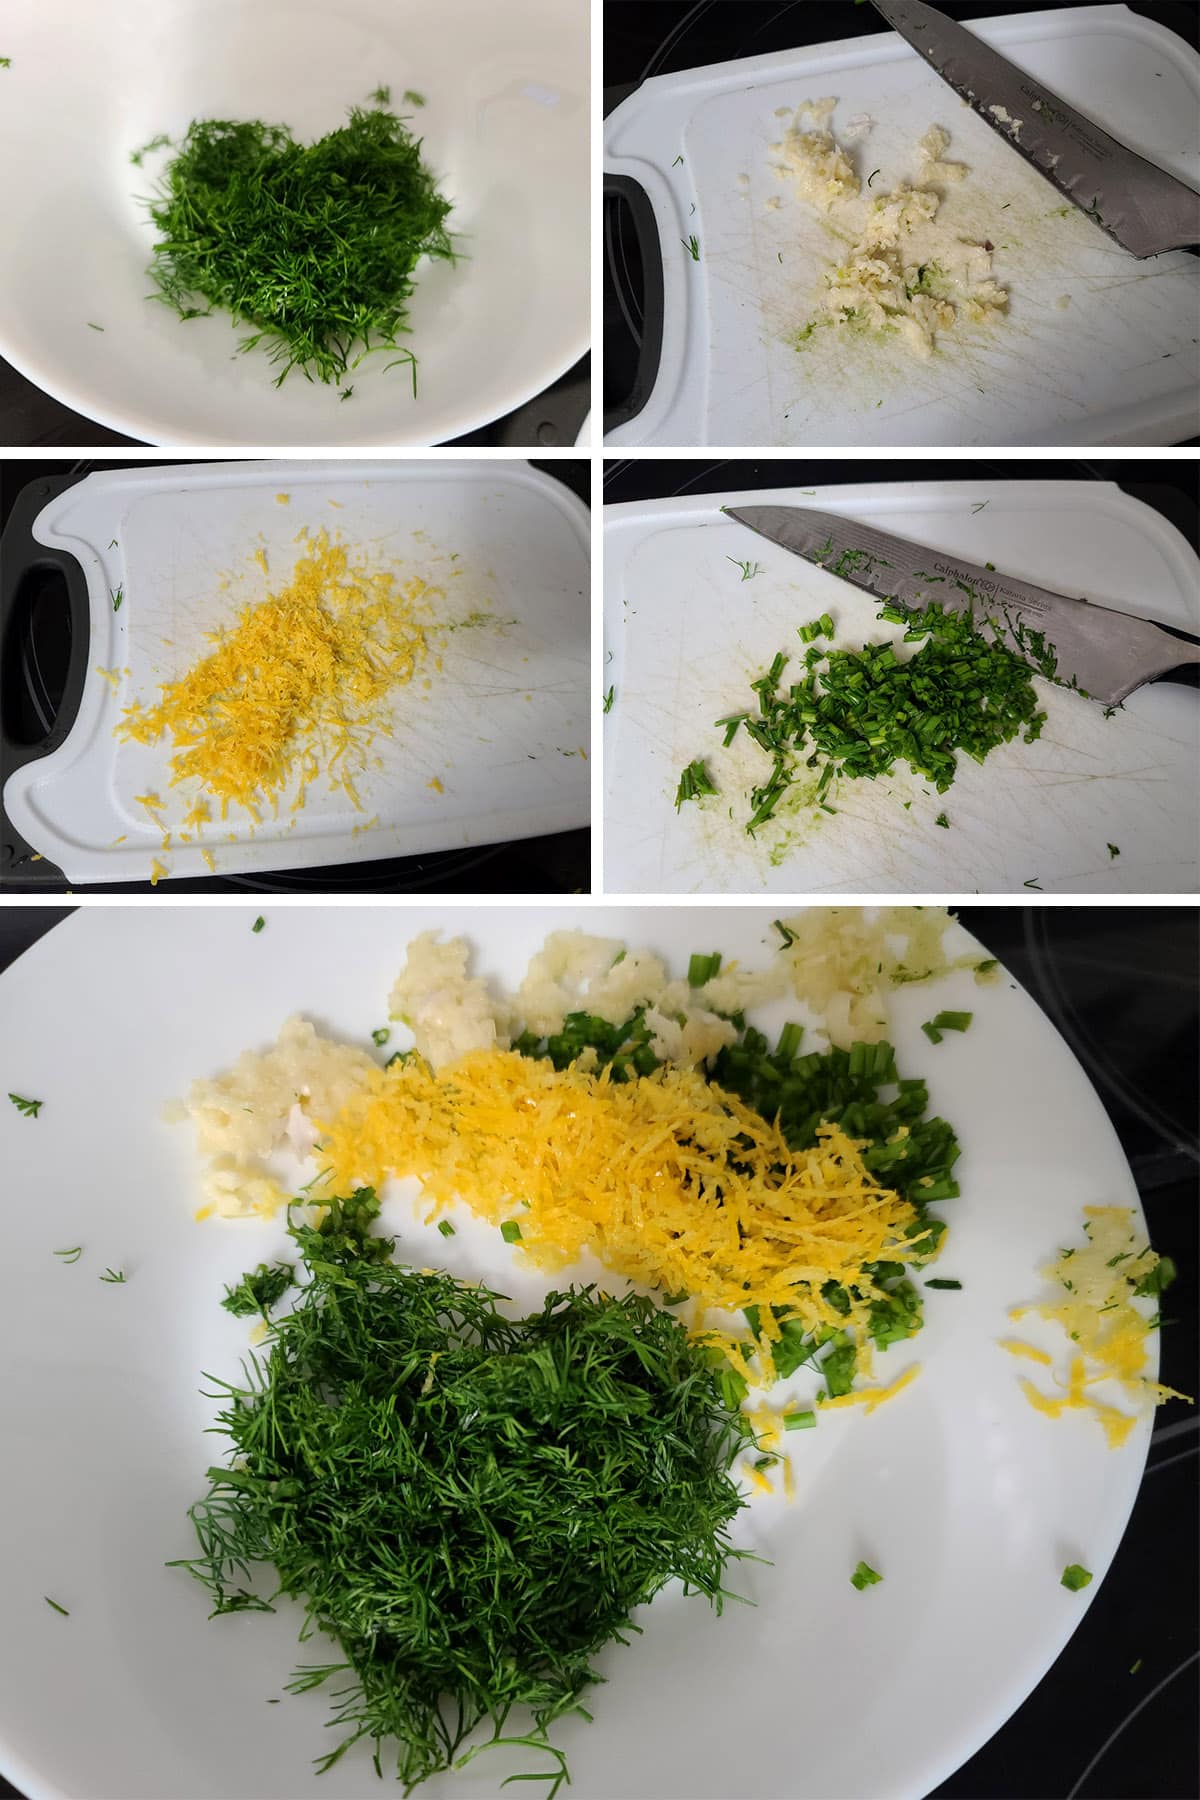 A 5 part image showing the lemon zest, dill, garlic, and chives being prepared.